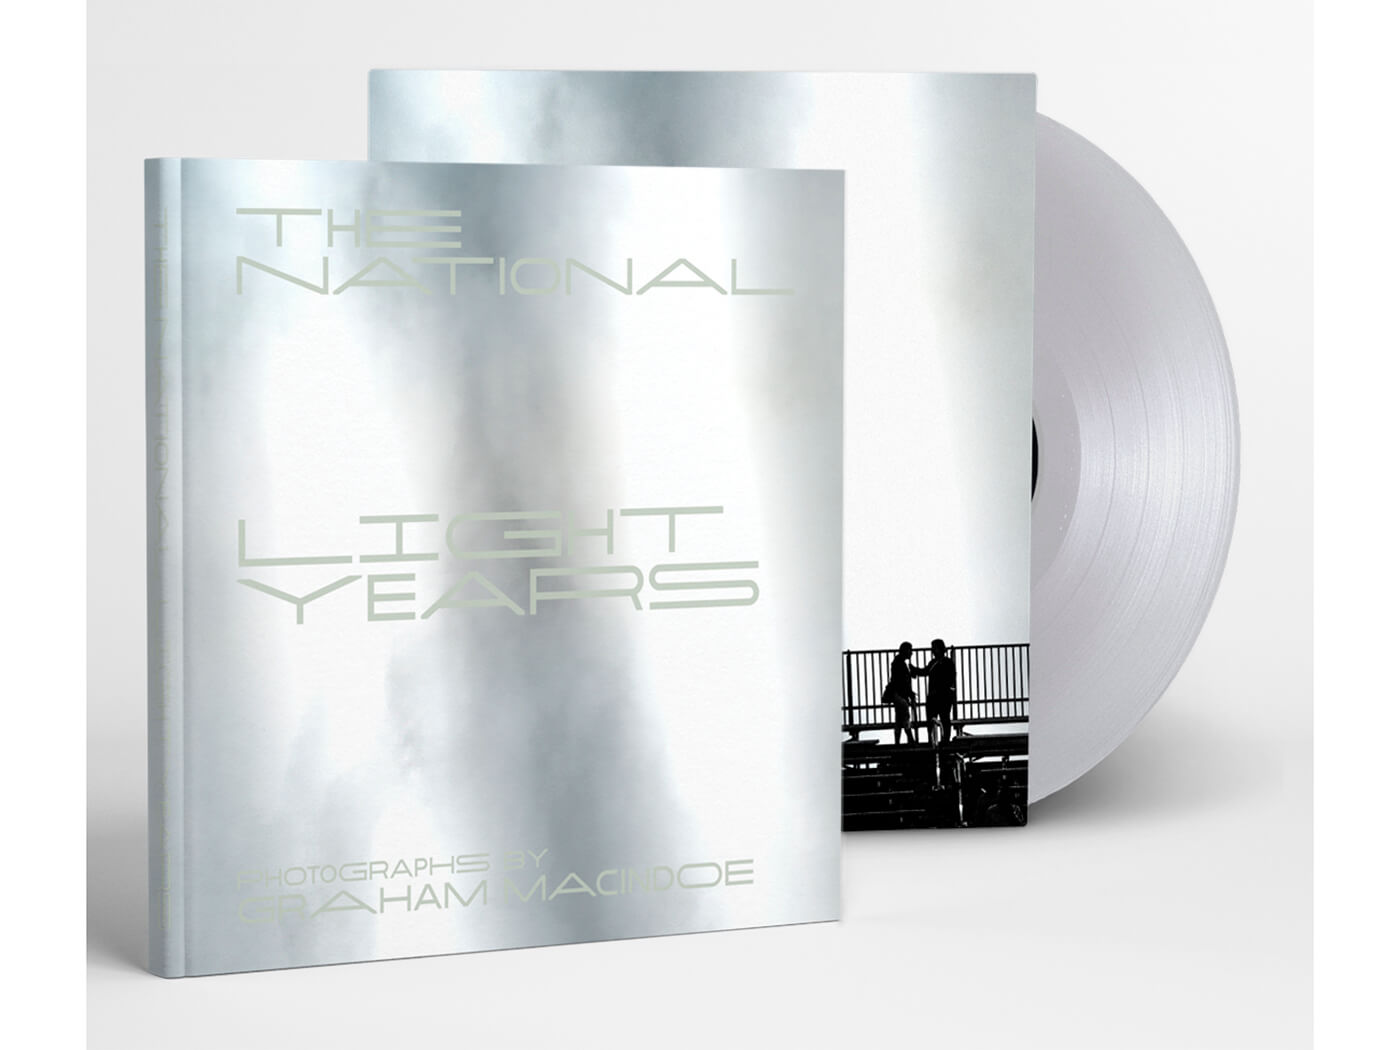 The unveil deluxe photobook, Light Years - UNCUT